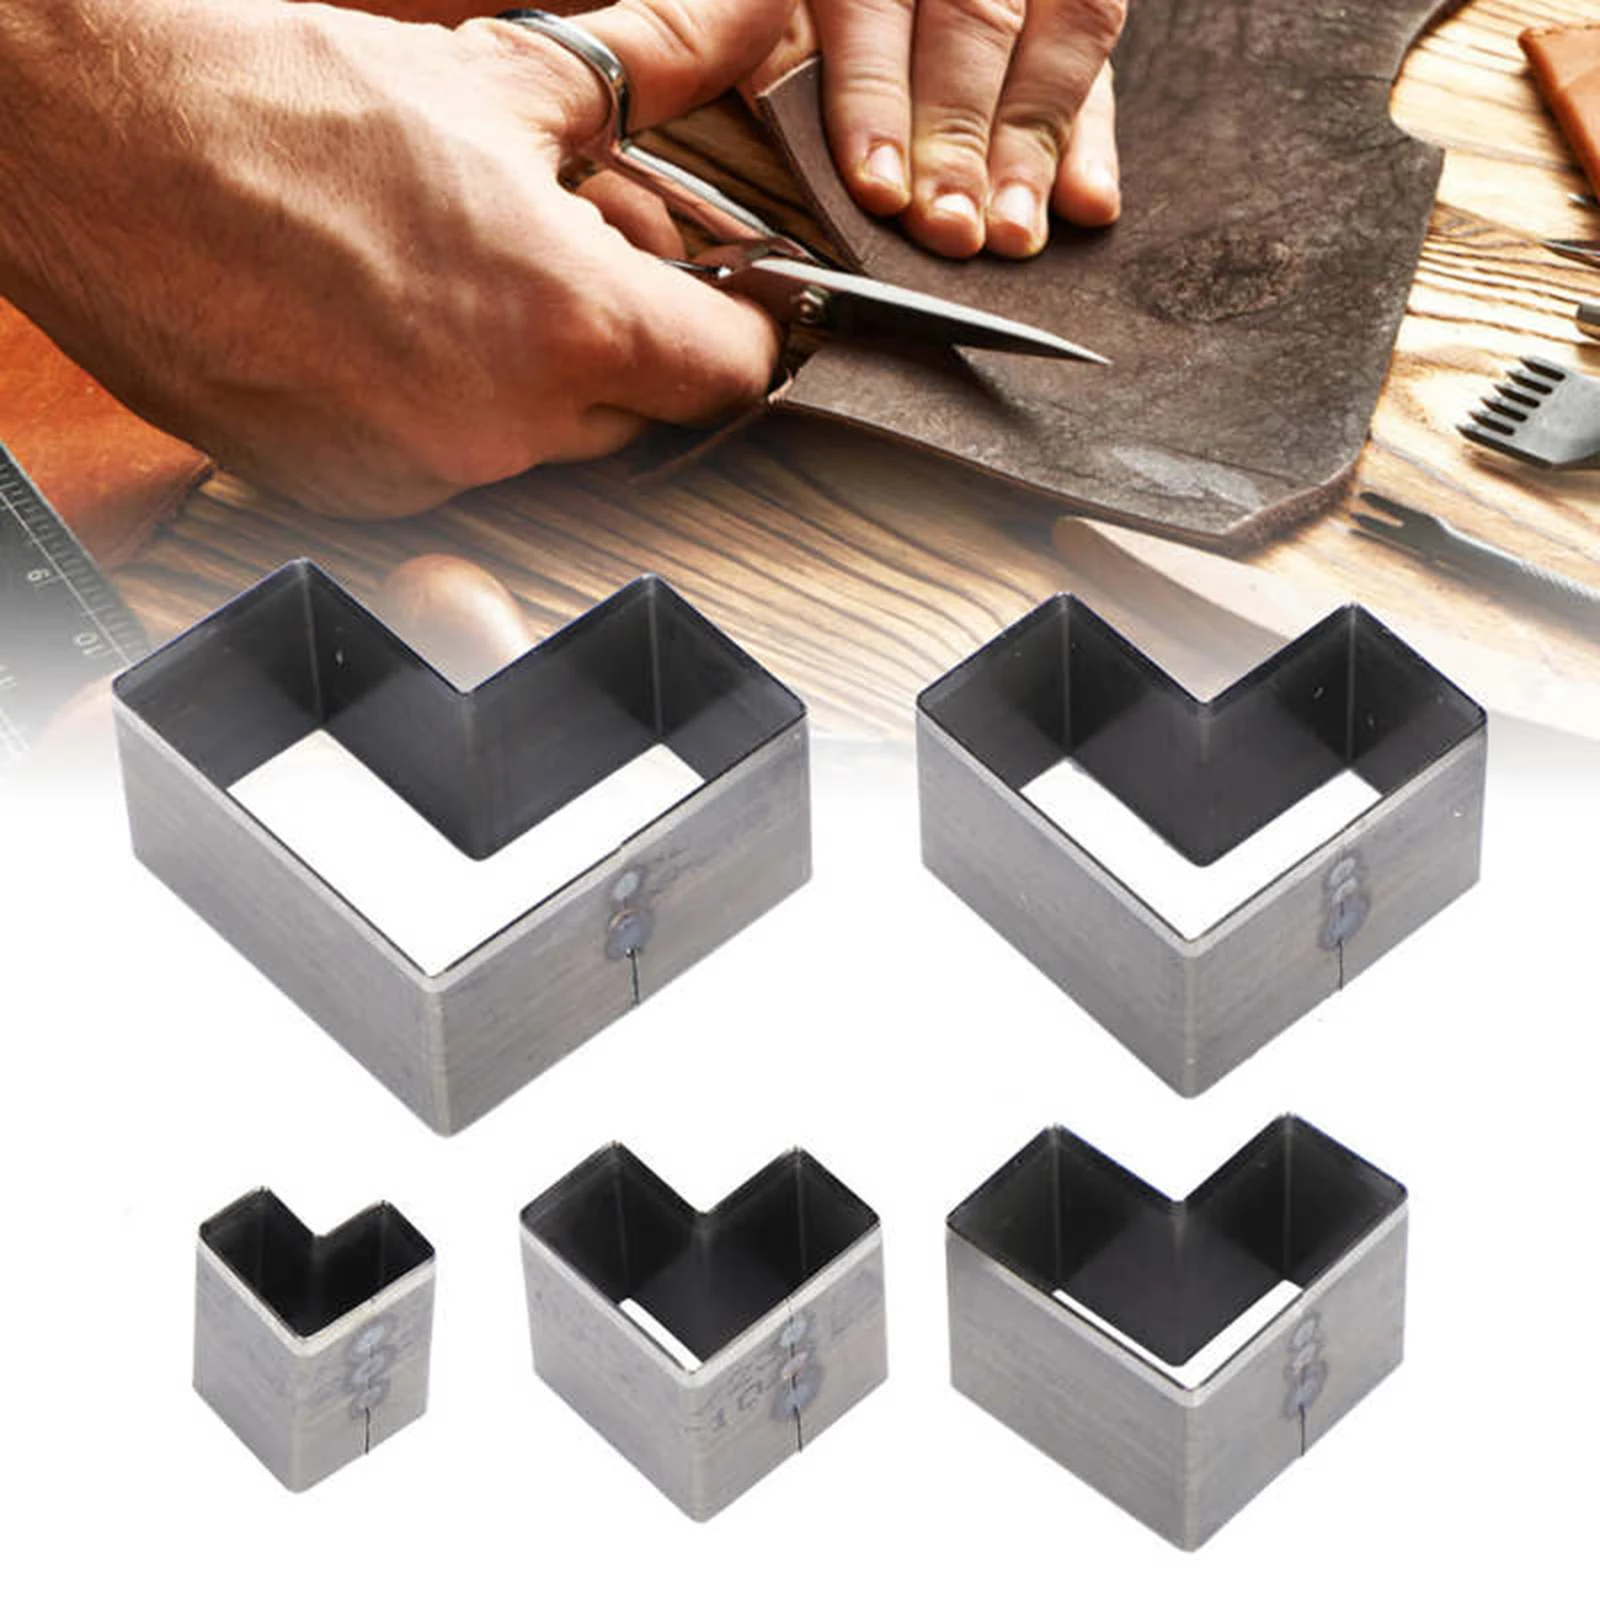 5Pcs Heart Leather Hole Hollow Punch Cutter Tool Leather Craft Set DIY for Handmade Leathercraft Jewelry Making